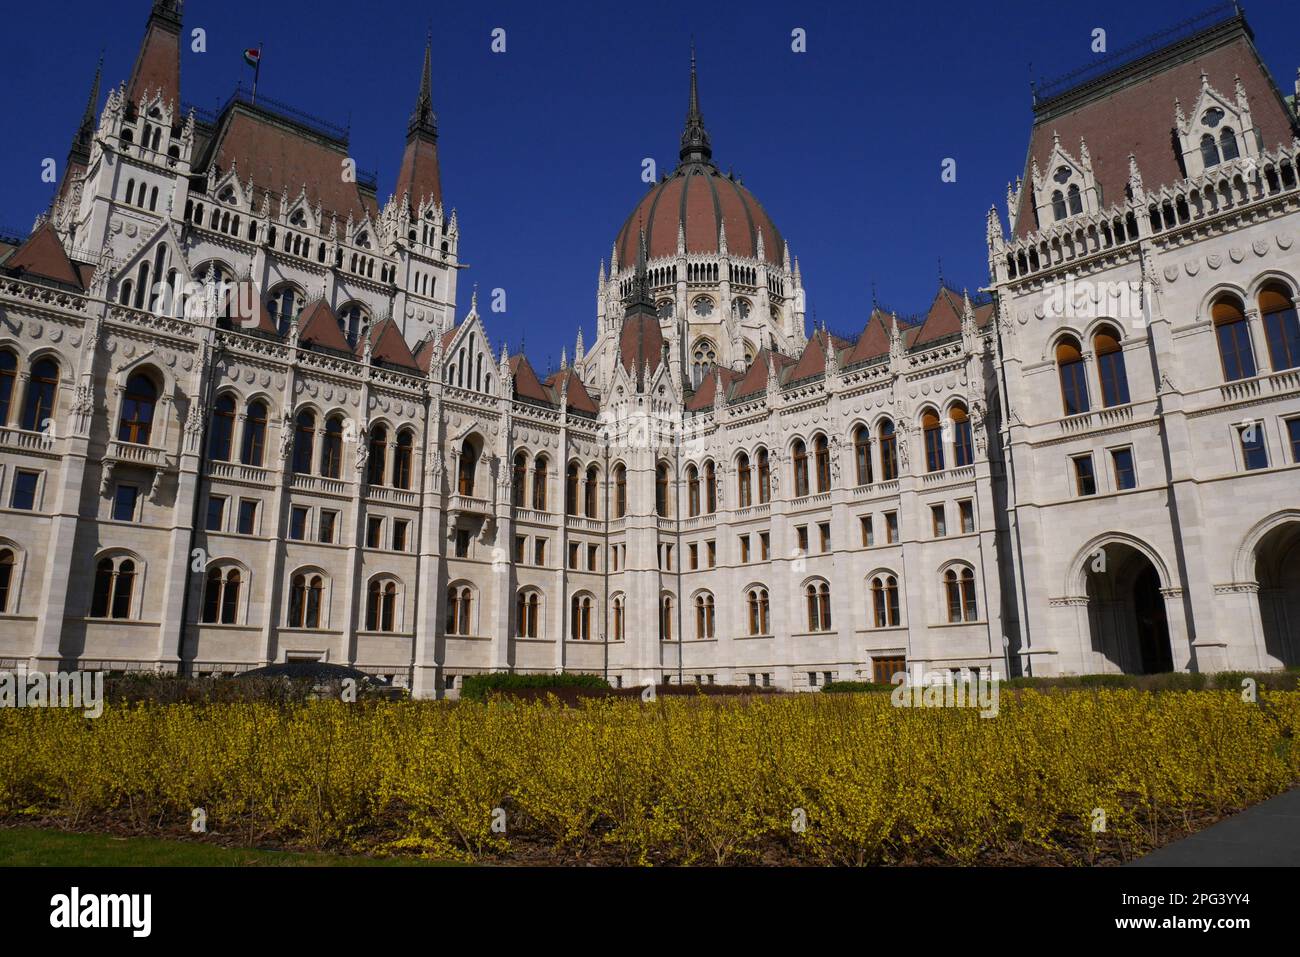 The neo-gothic Parliament building in Kossuth ter, Kossuth Square, forsythia in front, designed by Imre Steindl in 1885, Budapest, Hungary Stock Photo